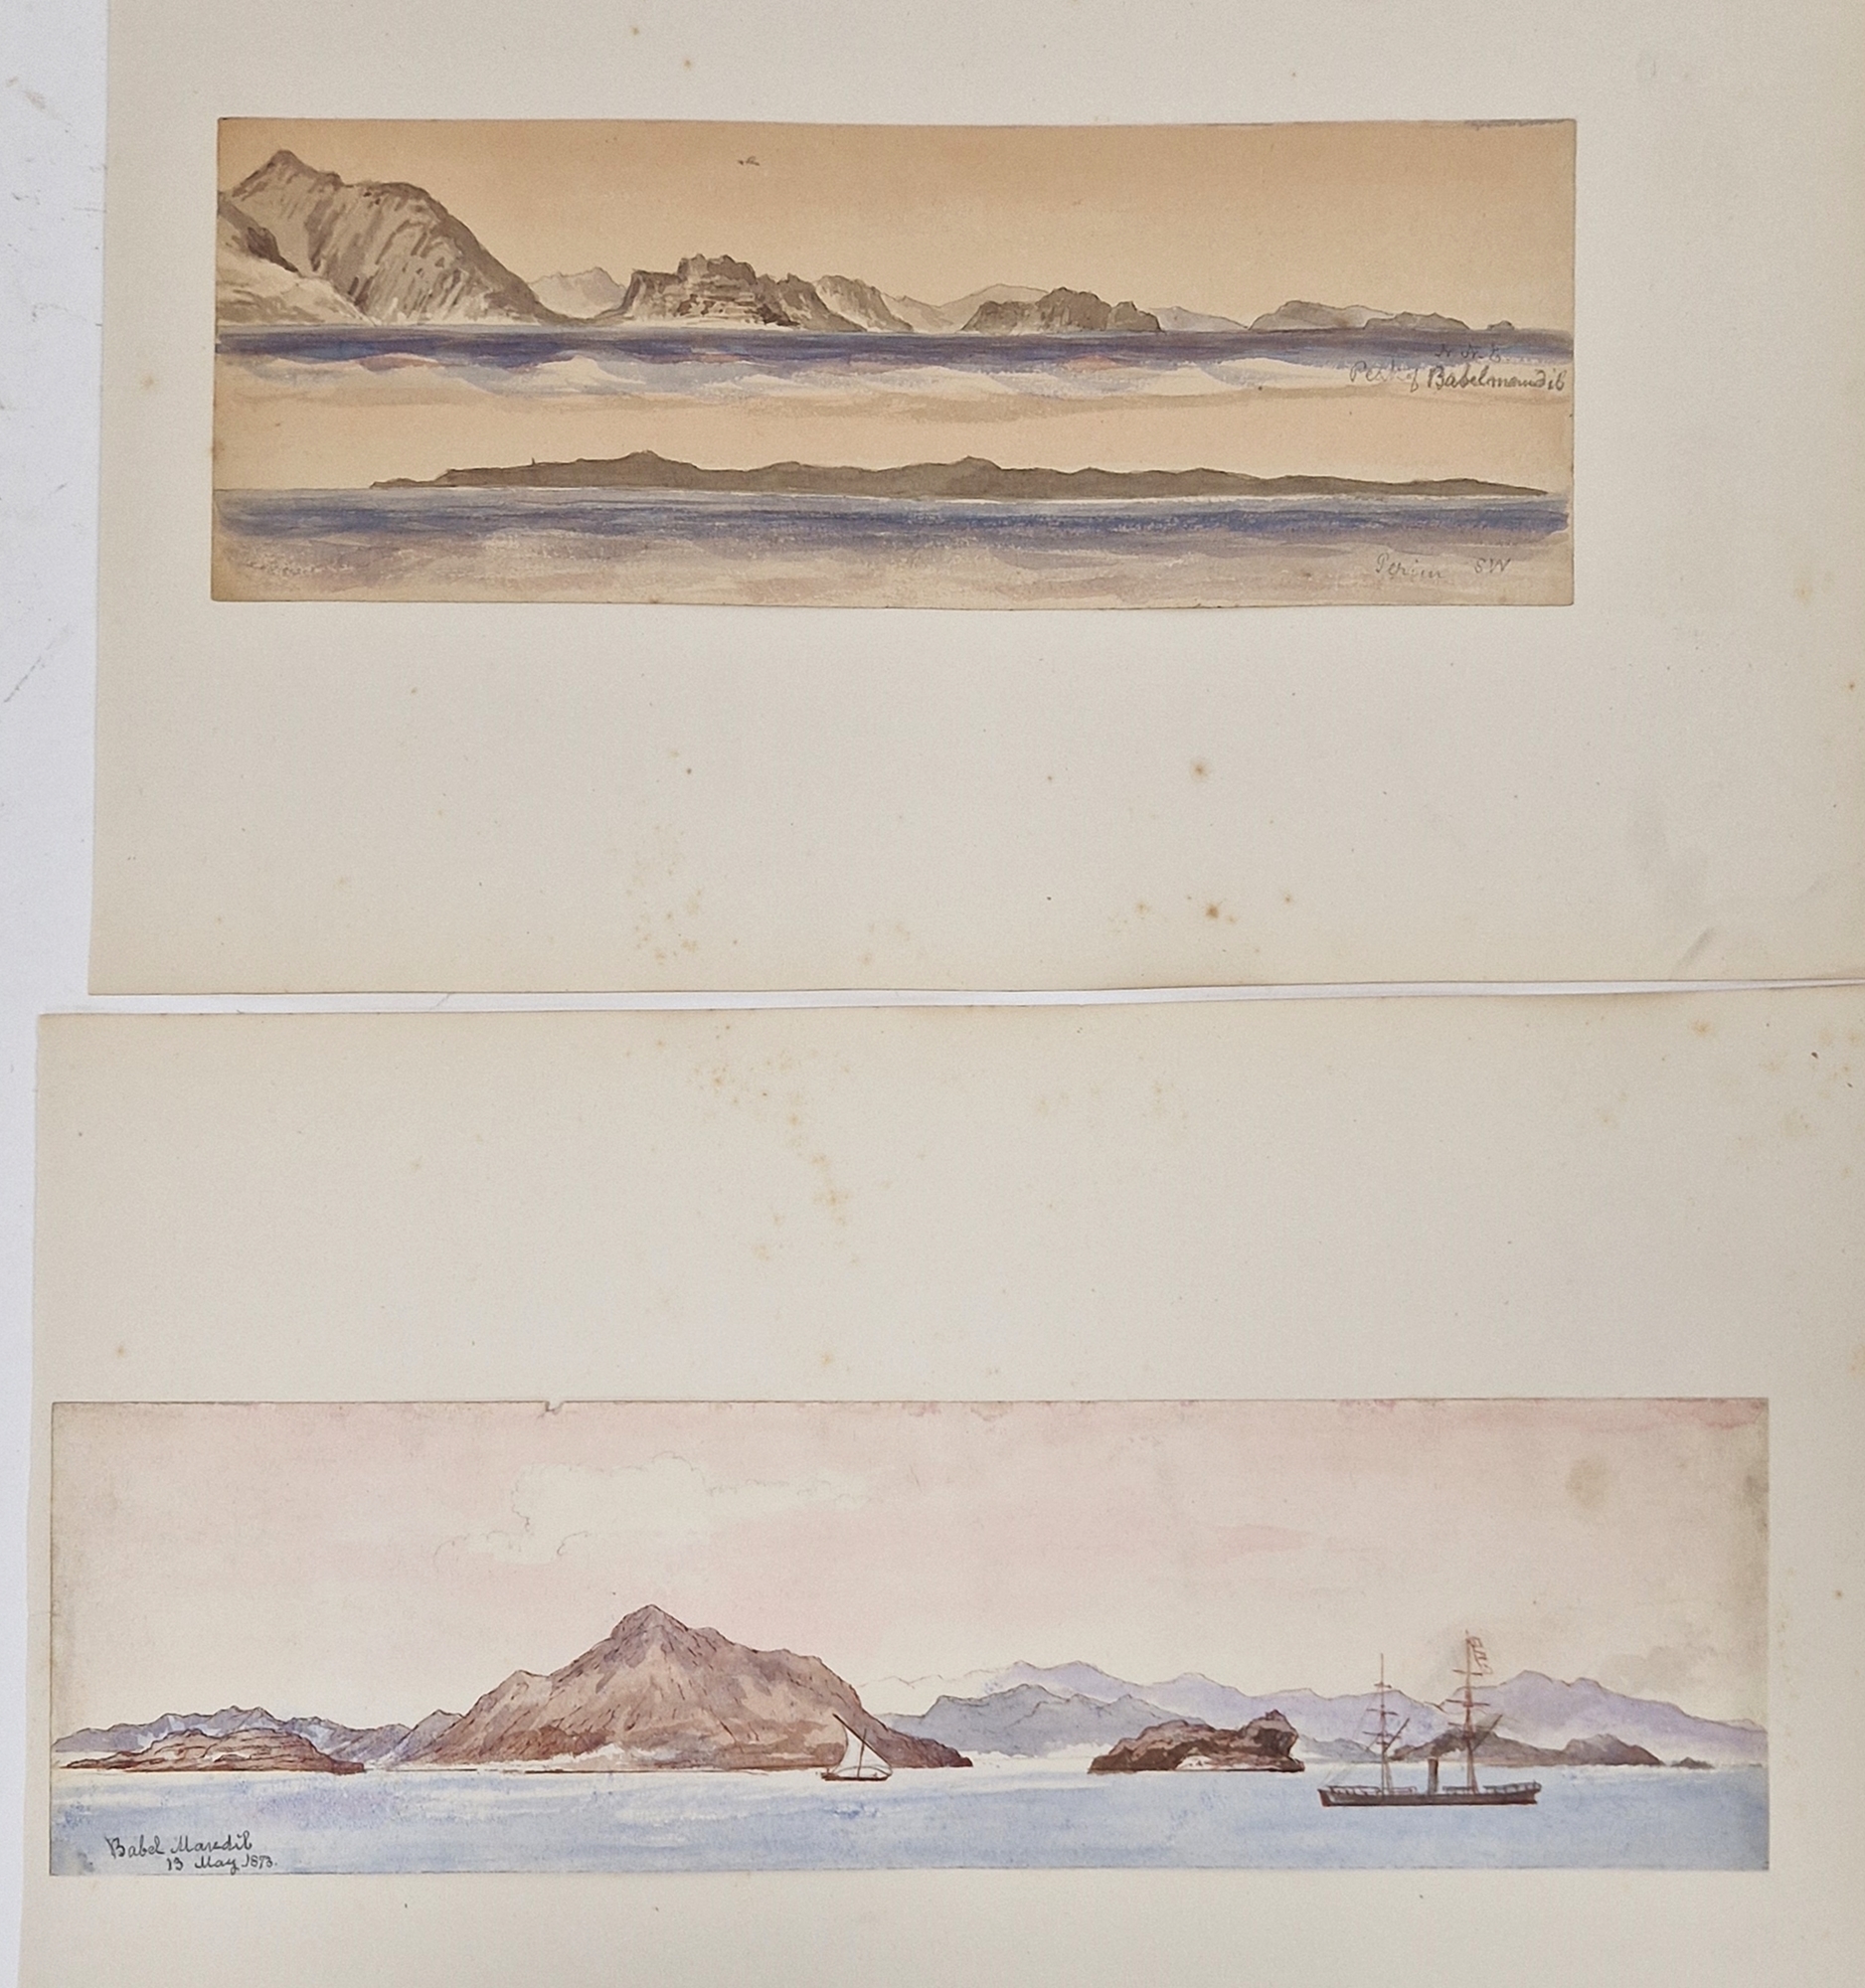 Watercolour drawings - collection Attrib. A H. Walter " A Passage from India to England 1873" - Image 11 of 13